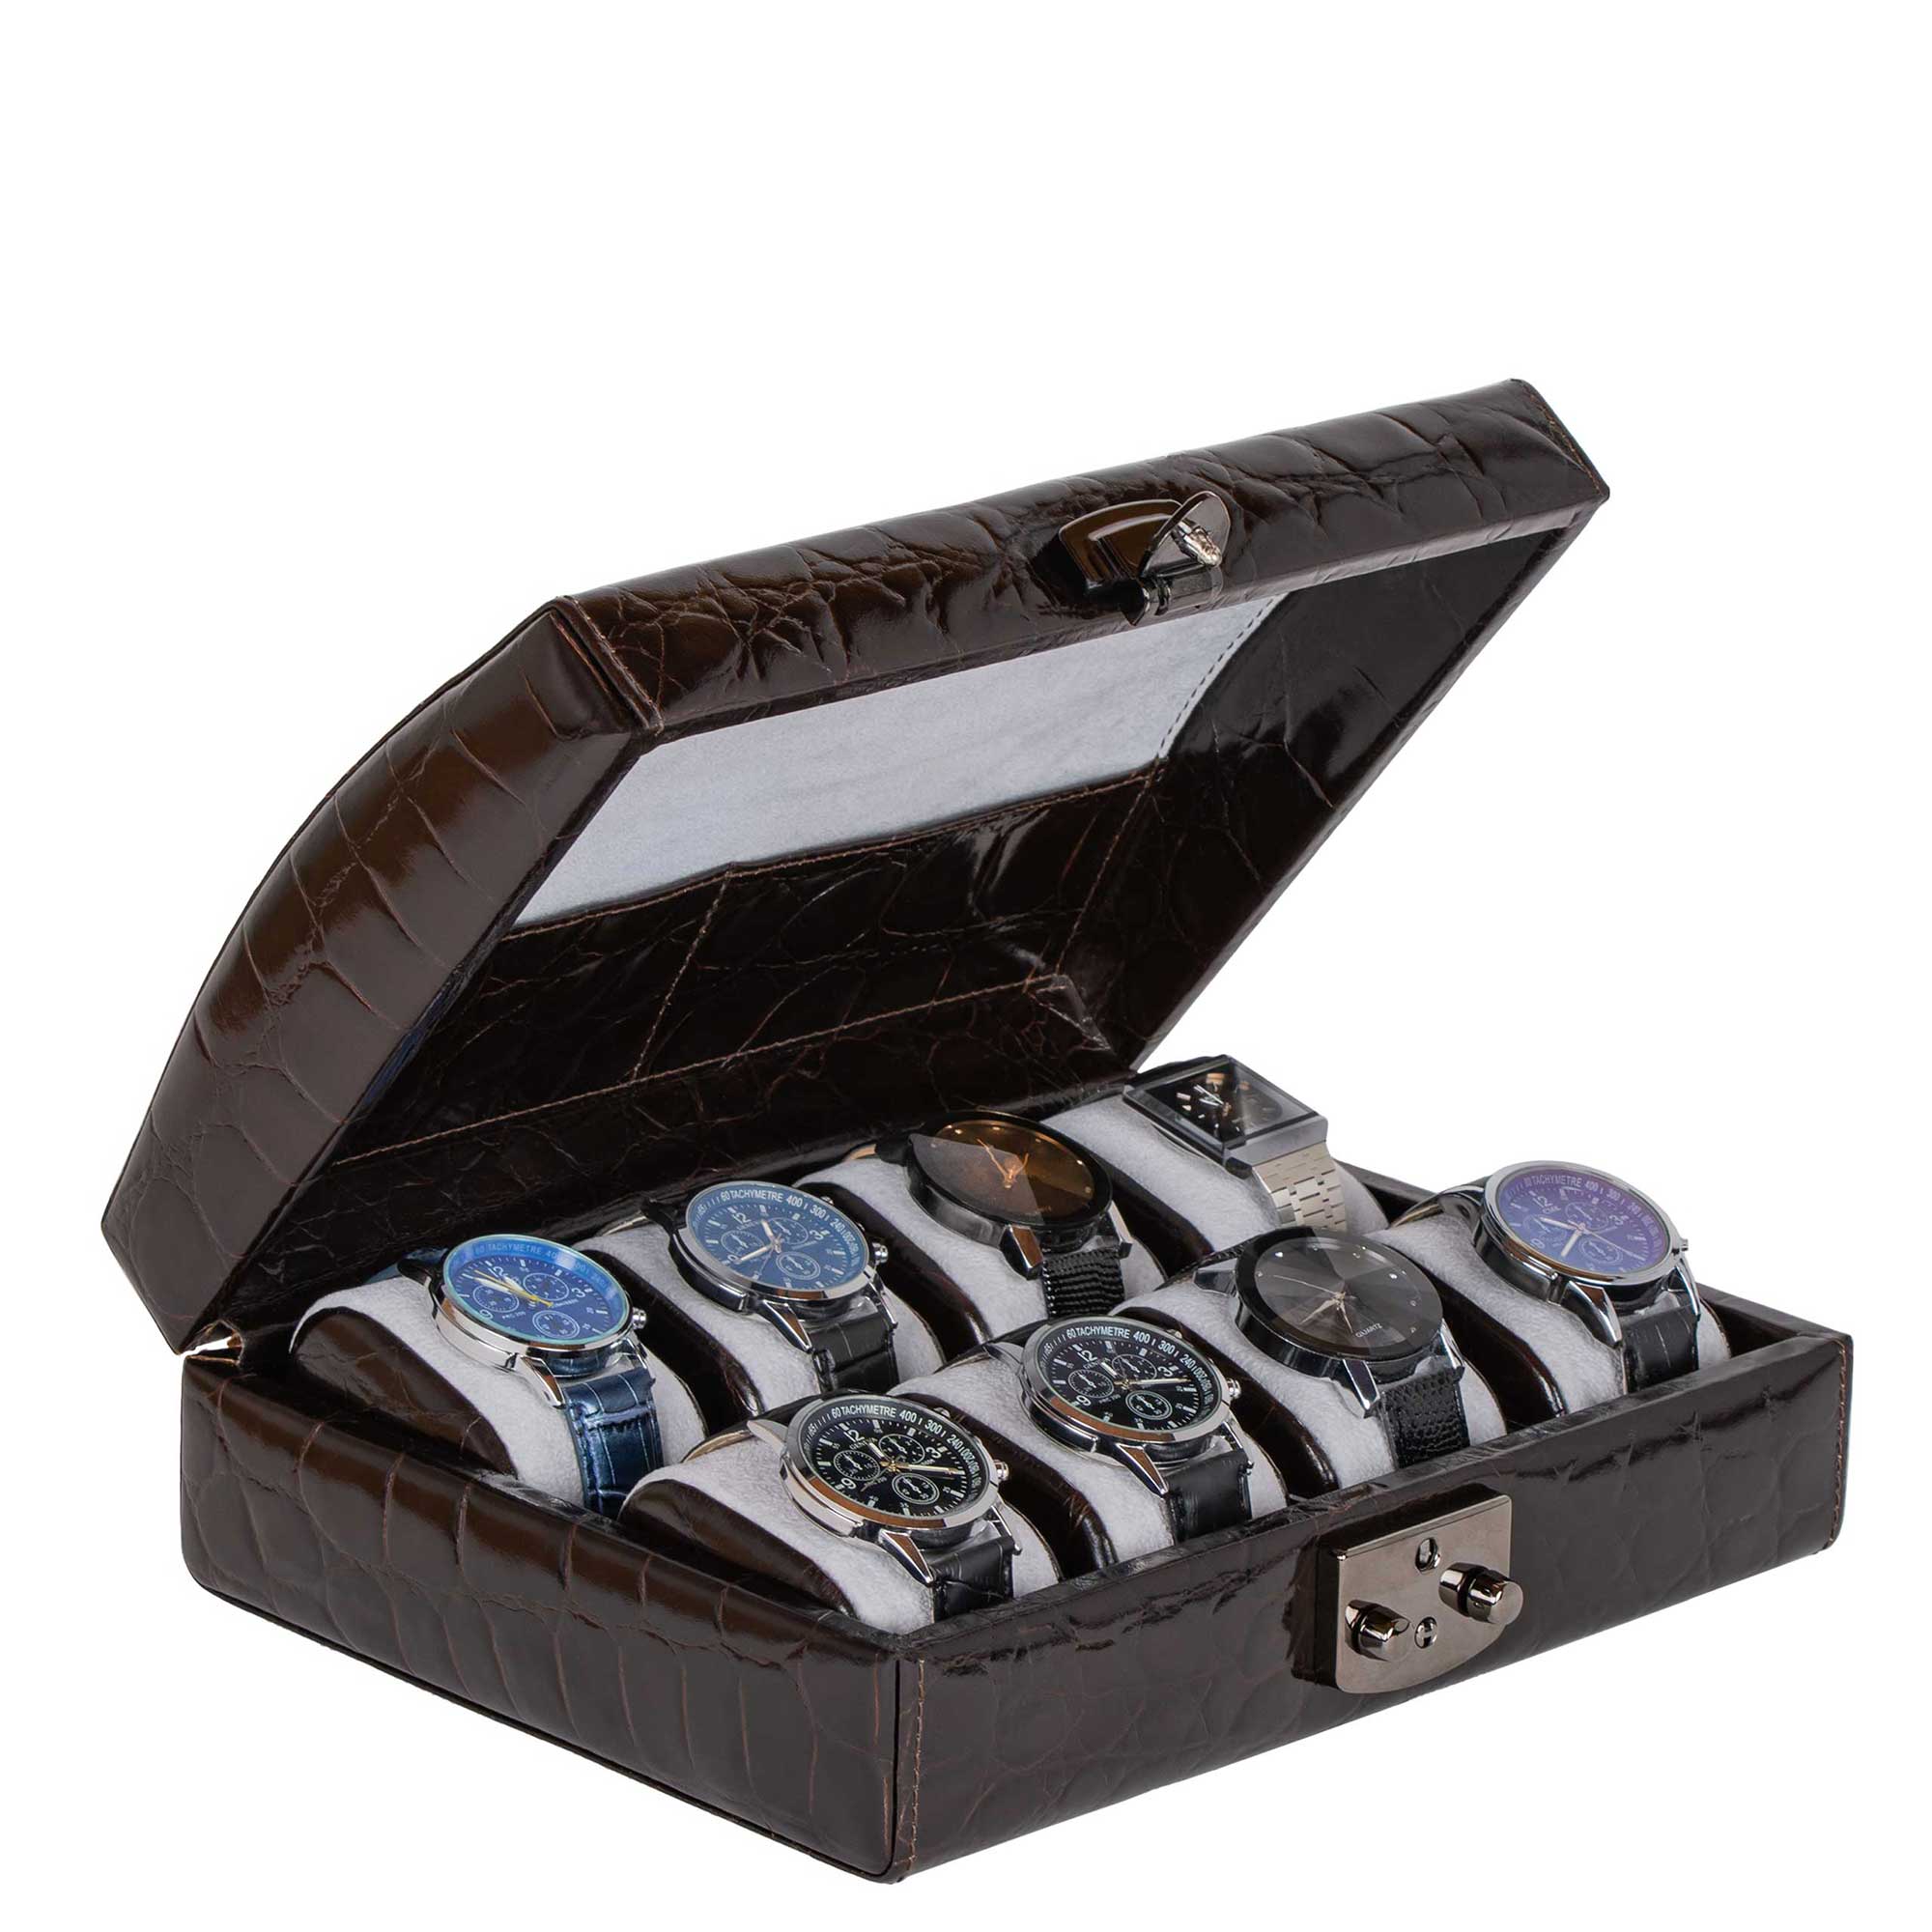 DiLoro Italian Leather Watch Cases - Designed in Switzerland - Made in Italy